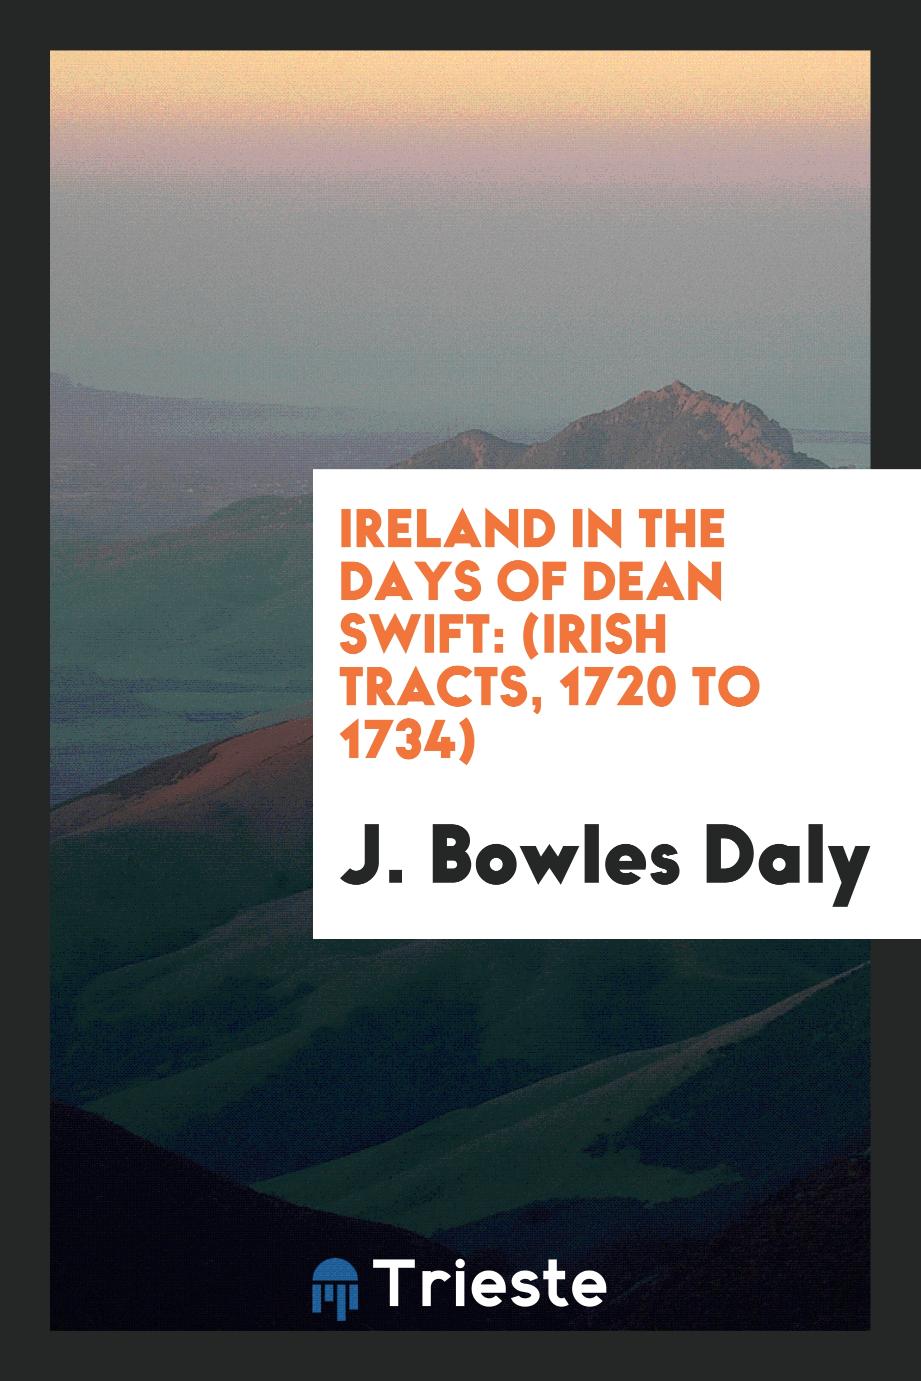 Ireland in the Days of Dean Swift: (Irish Tracts, 1720 to 1734)